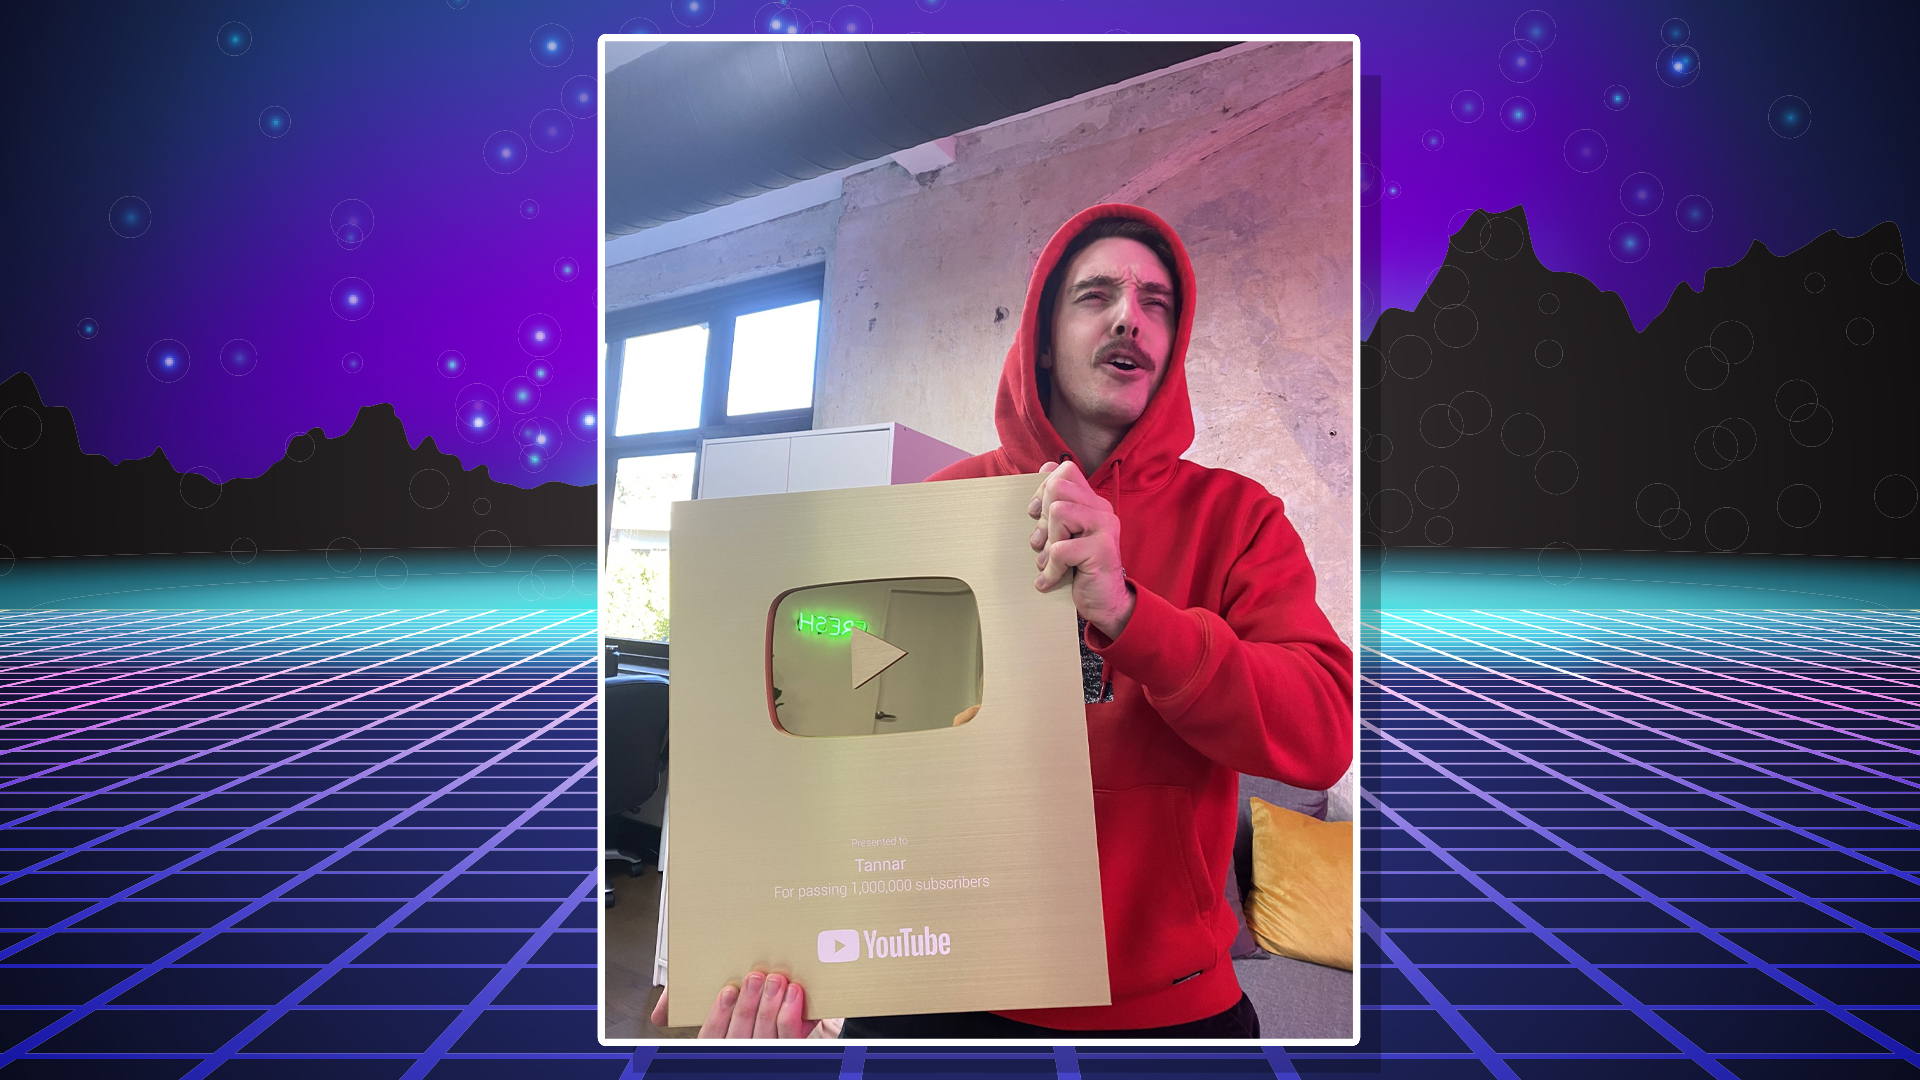 LazarBeam with a YouTube award